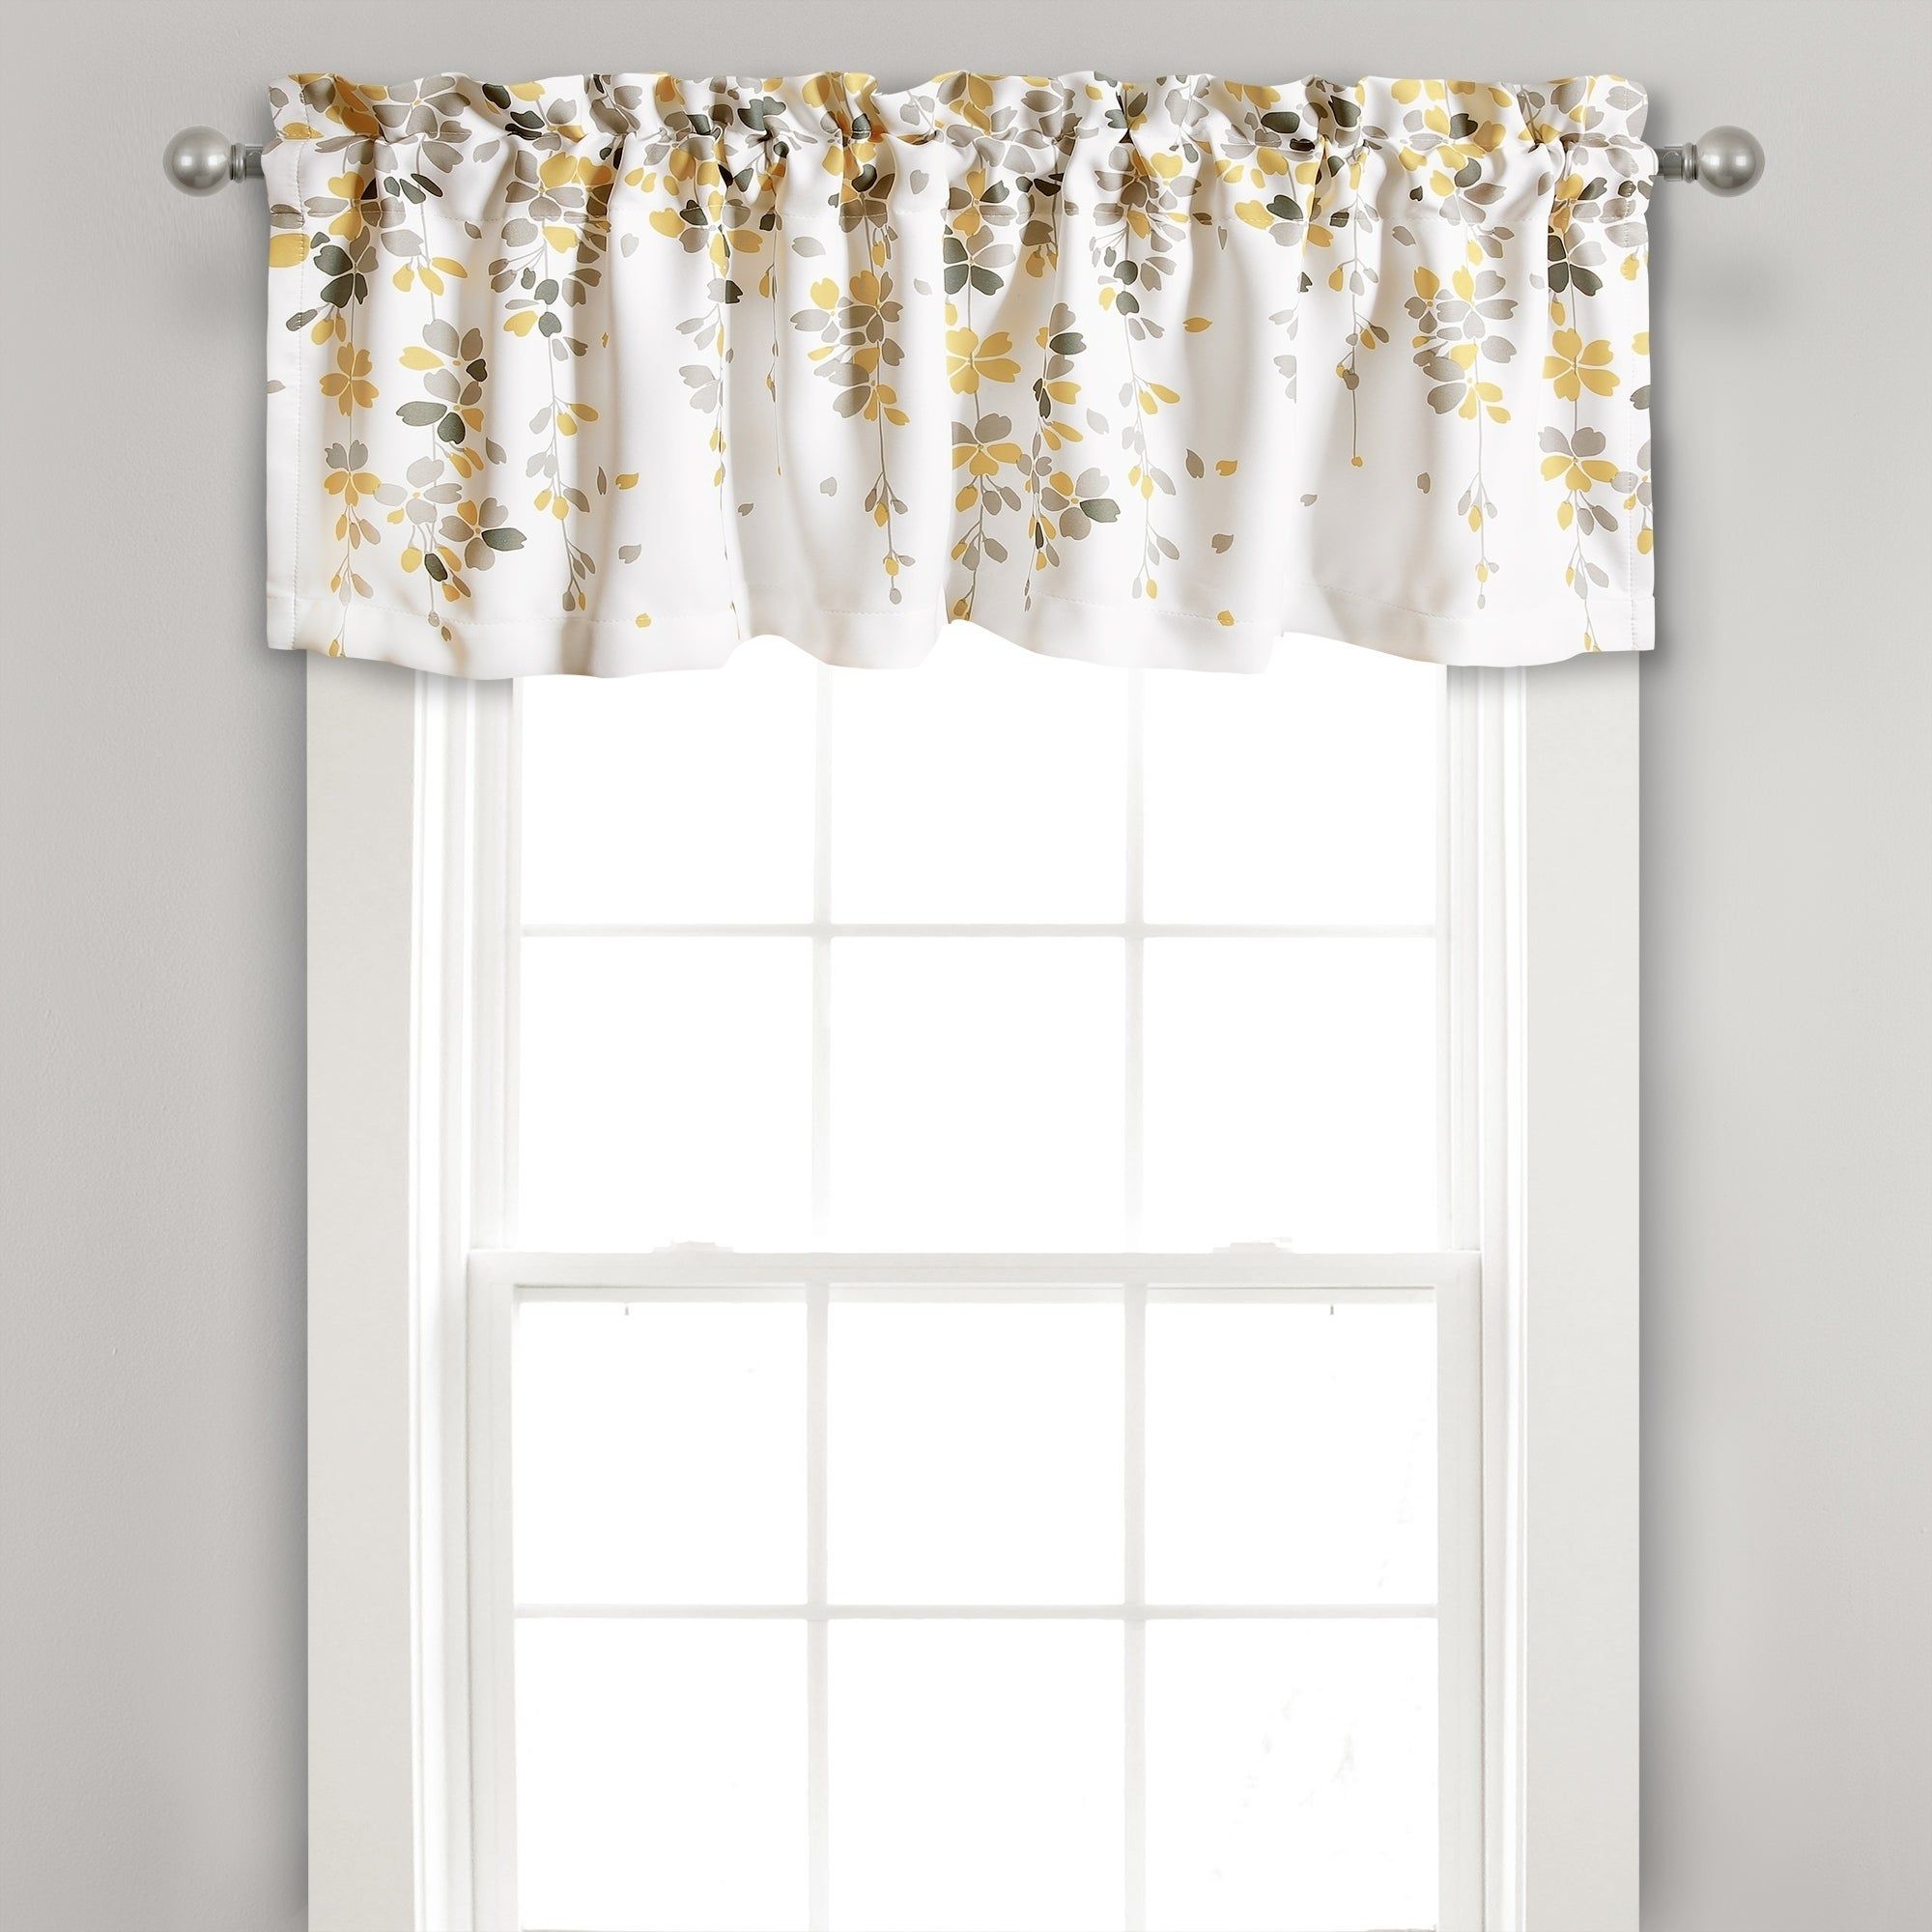 Lush Decor Weeping Flower Room Darkening Window Curtain Valance – 52x18 Regarding Traditional Tailored Tier And Swag Window Curtains Sets With Ornate Flower Garden Print (Photo 13 of 20)